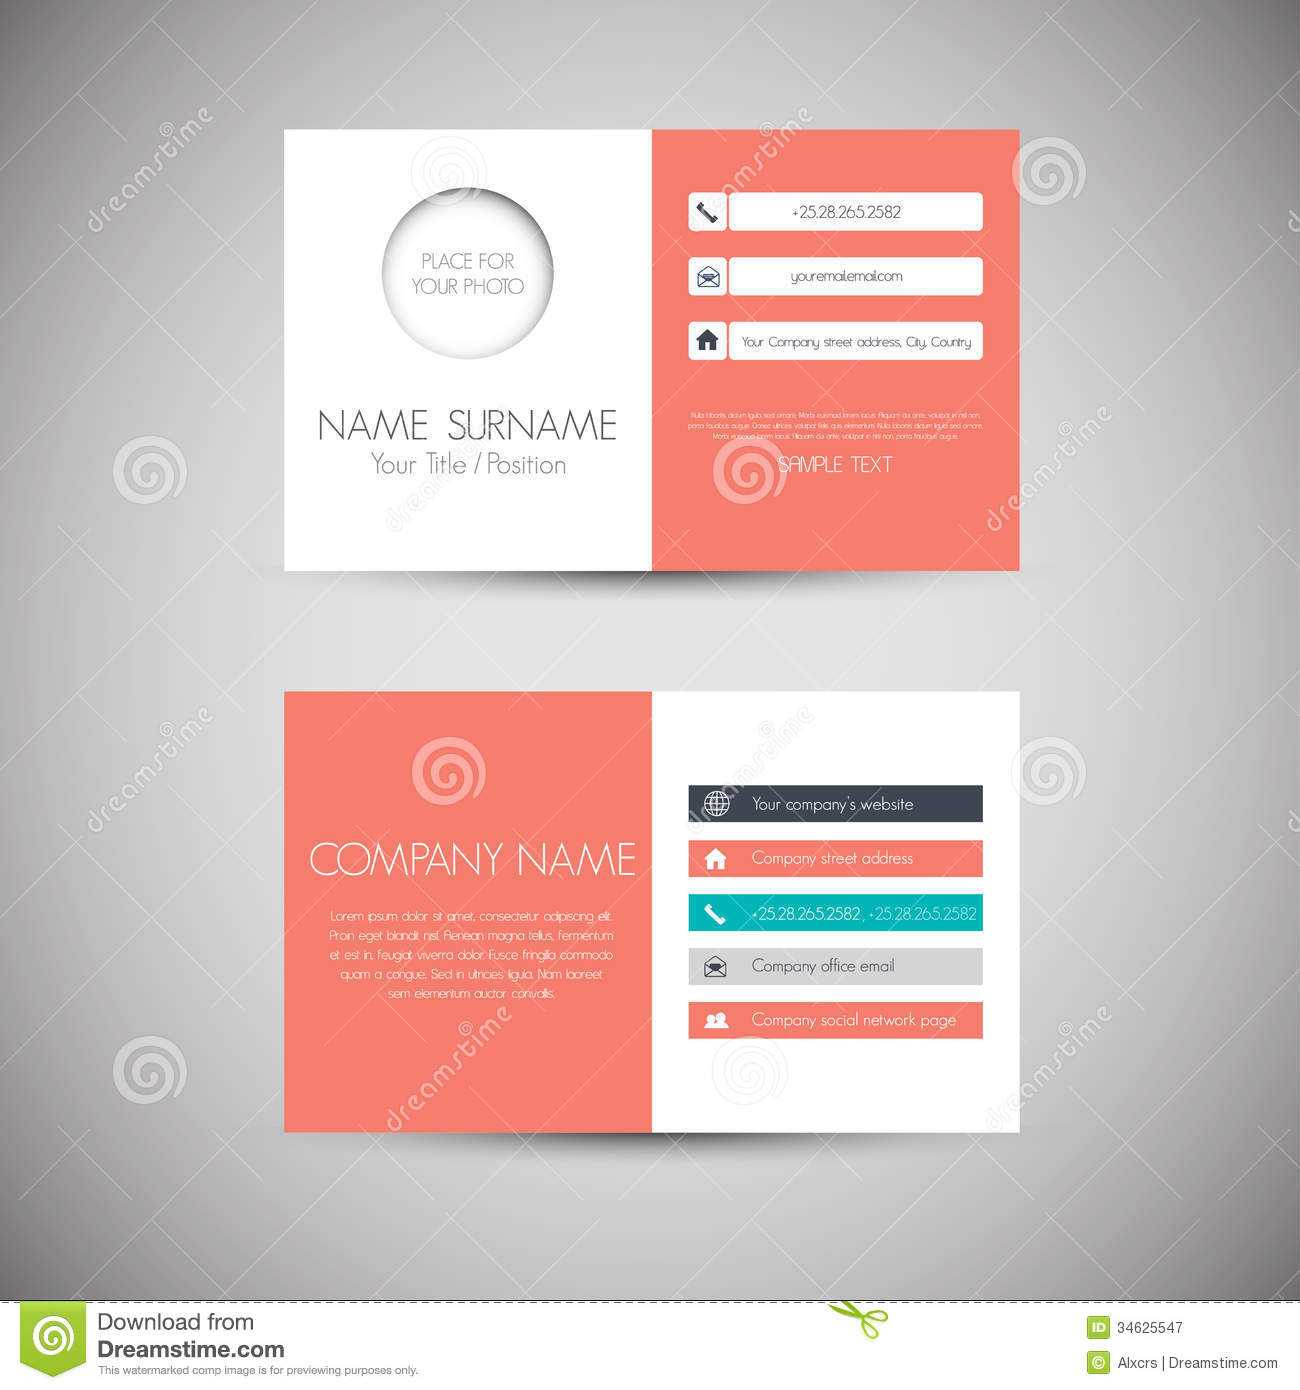 Business Card Stock Vector. Illustration Of Media For Photography Referral Card Templates